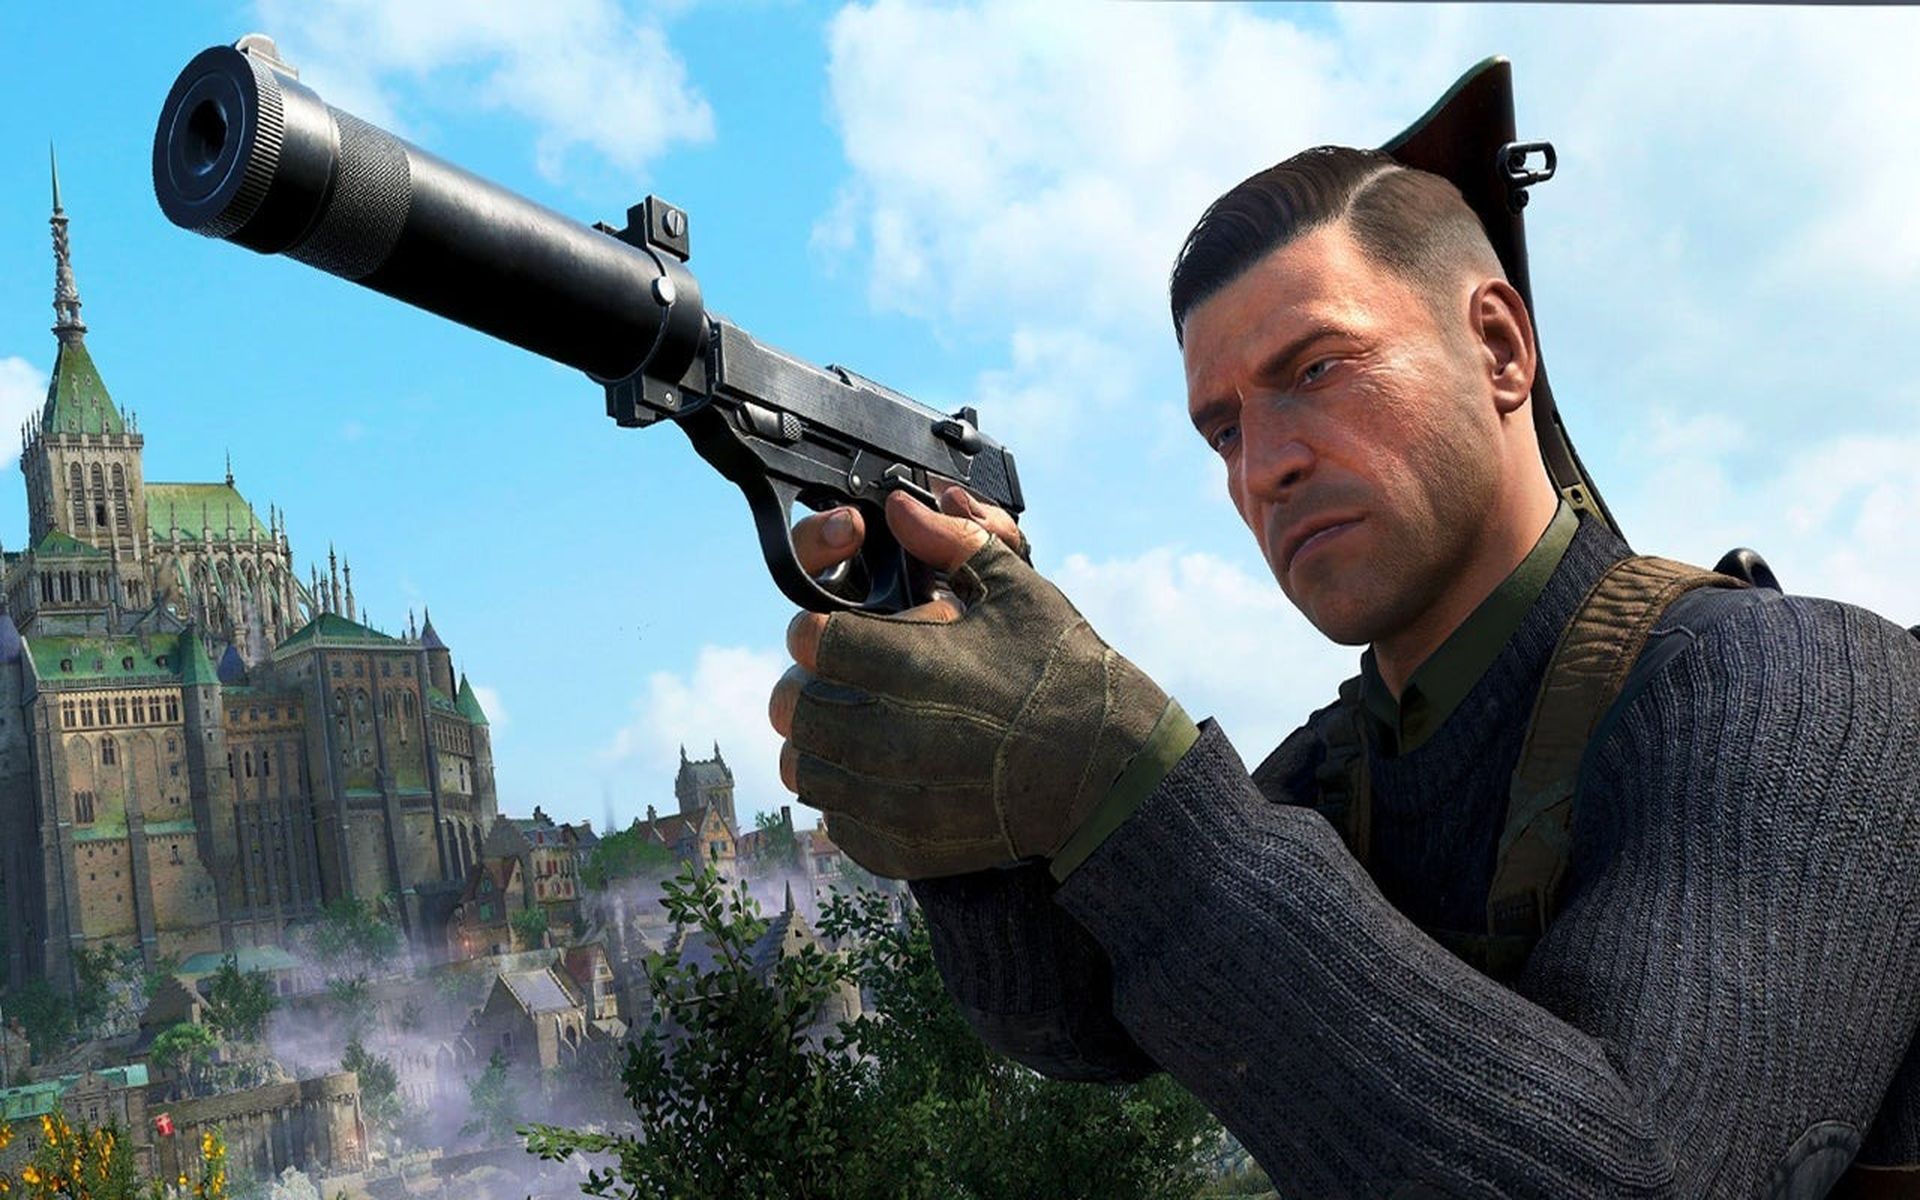 Are you ready for Sniper Elite 5 Game Pass? The game will be available on May 25th. Learn how to fix Windows cannot access the specified device.